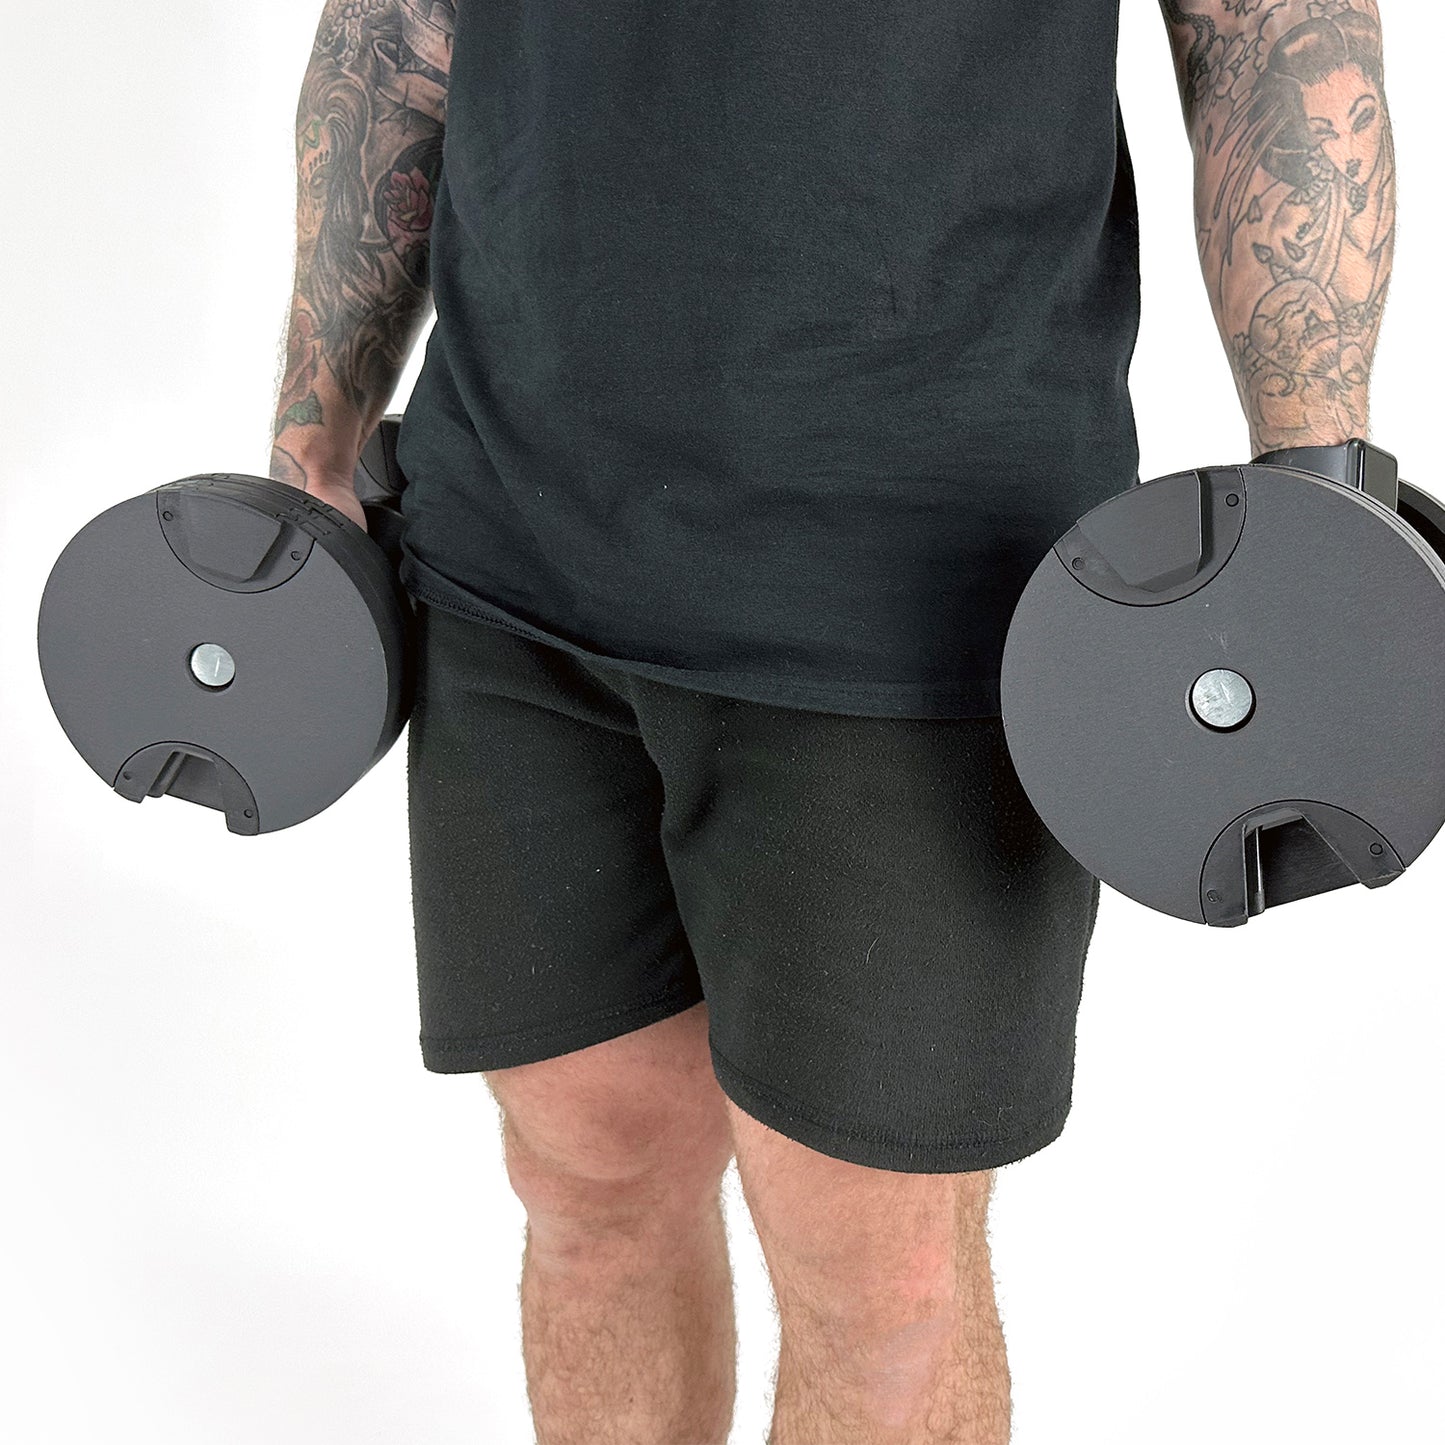 Fitness Model Using BRAINGAIN 40kg Round Adjustable Dumbbells Standing With Dumbbells By Side